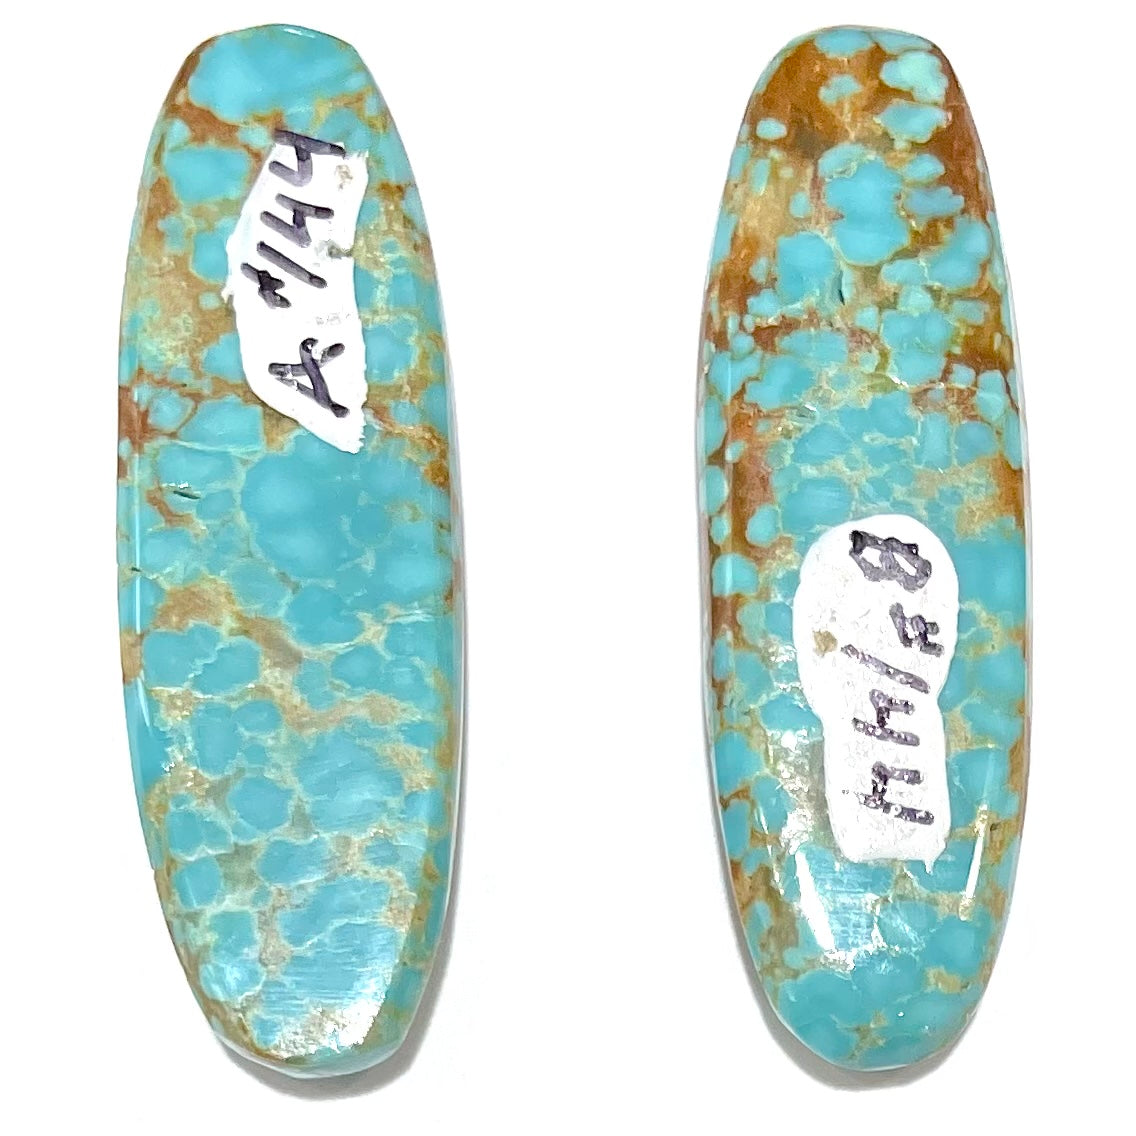 A pair of loose oval cabochon cut turquoise stones from Number 8 Mine, Nevada.